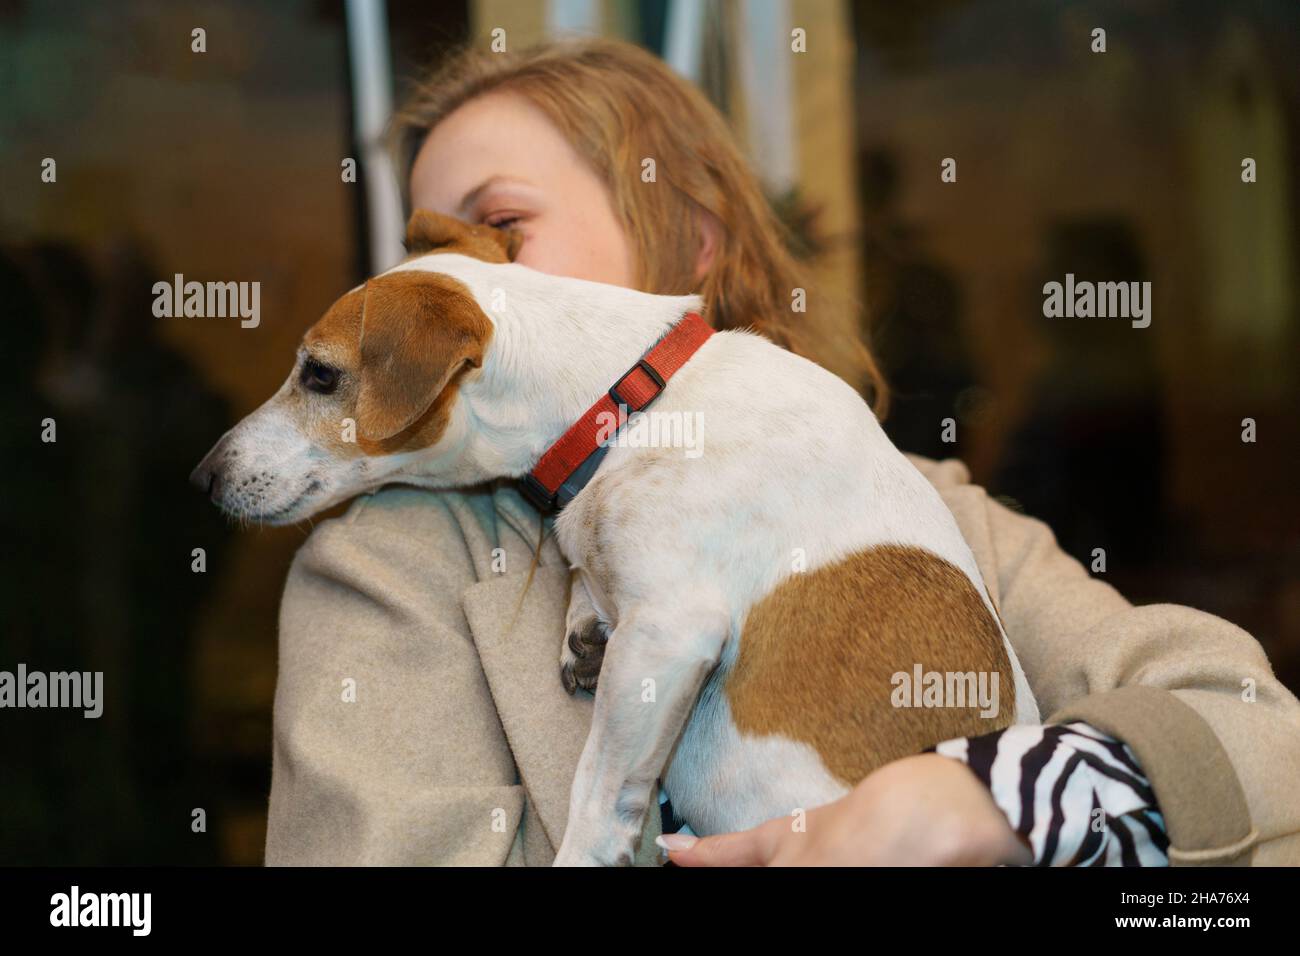 Young Woman Holding A Dog In Her Hands. Dog Put Its Head On Her Shoulder. Stock Photo